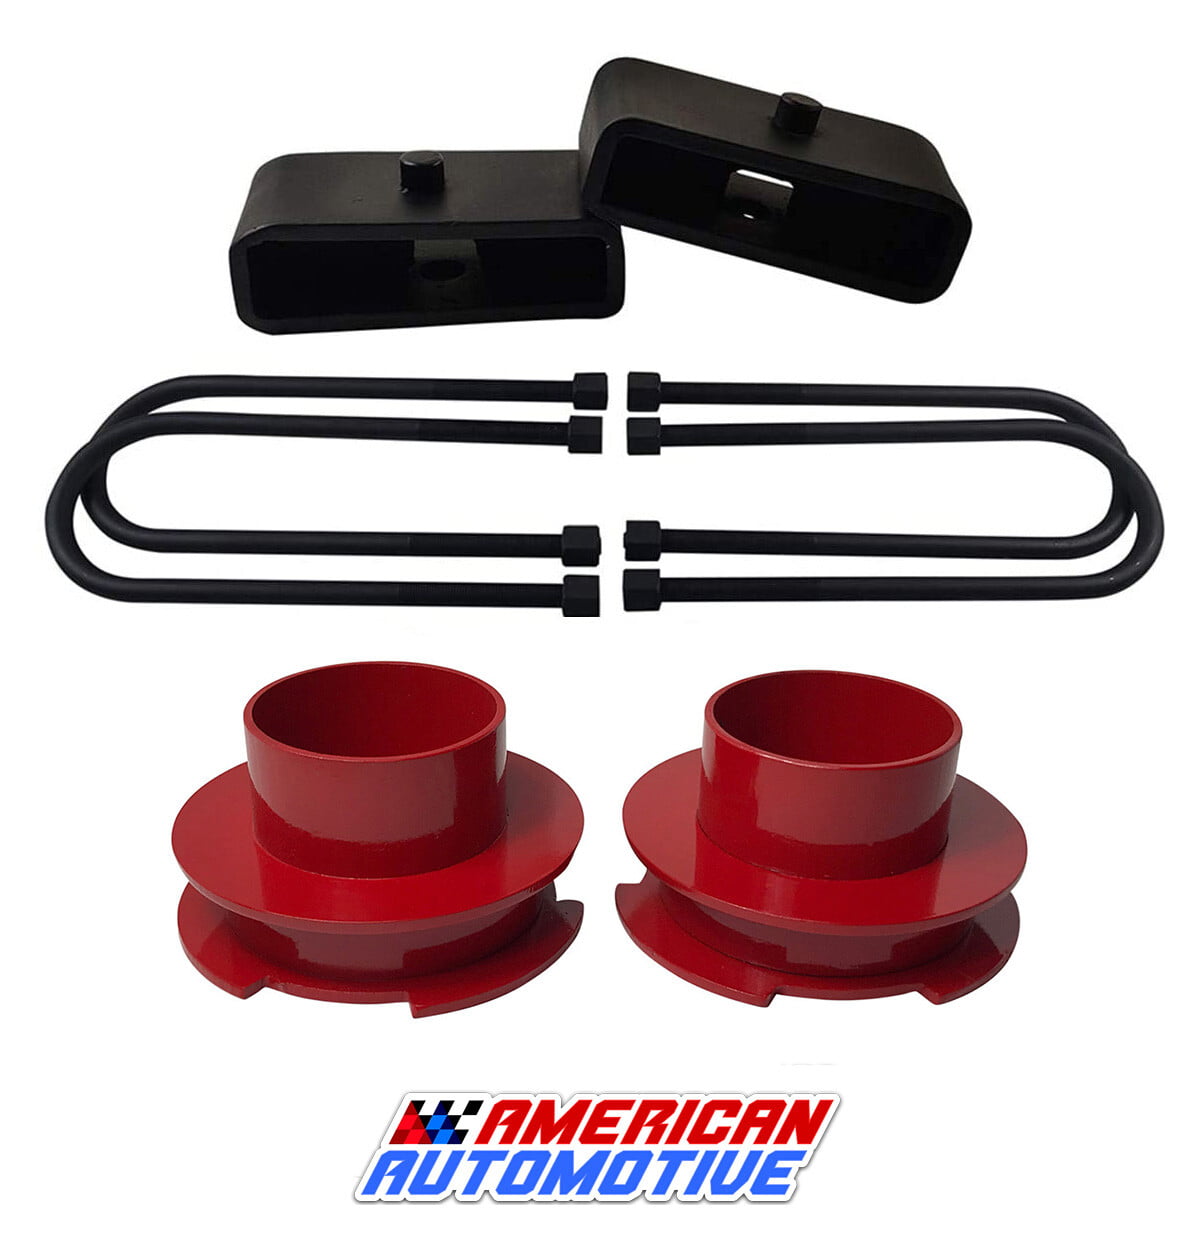 American Automotive Compatible with 1998-2010 Ranger Lift Kit 2WD 3 Front Spring Spacers 1.5 Rear Blocks Road Fury Leveling Lift Kit Only Fits 3.25 Axles 